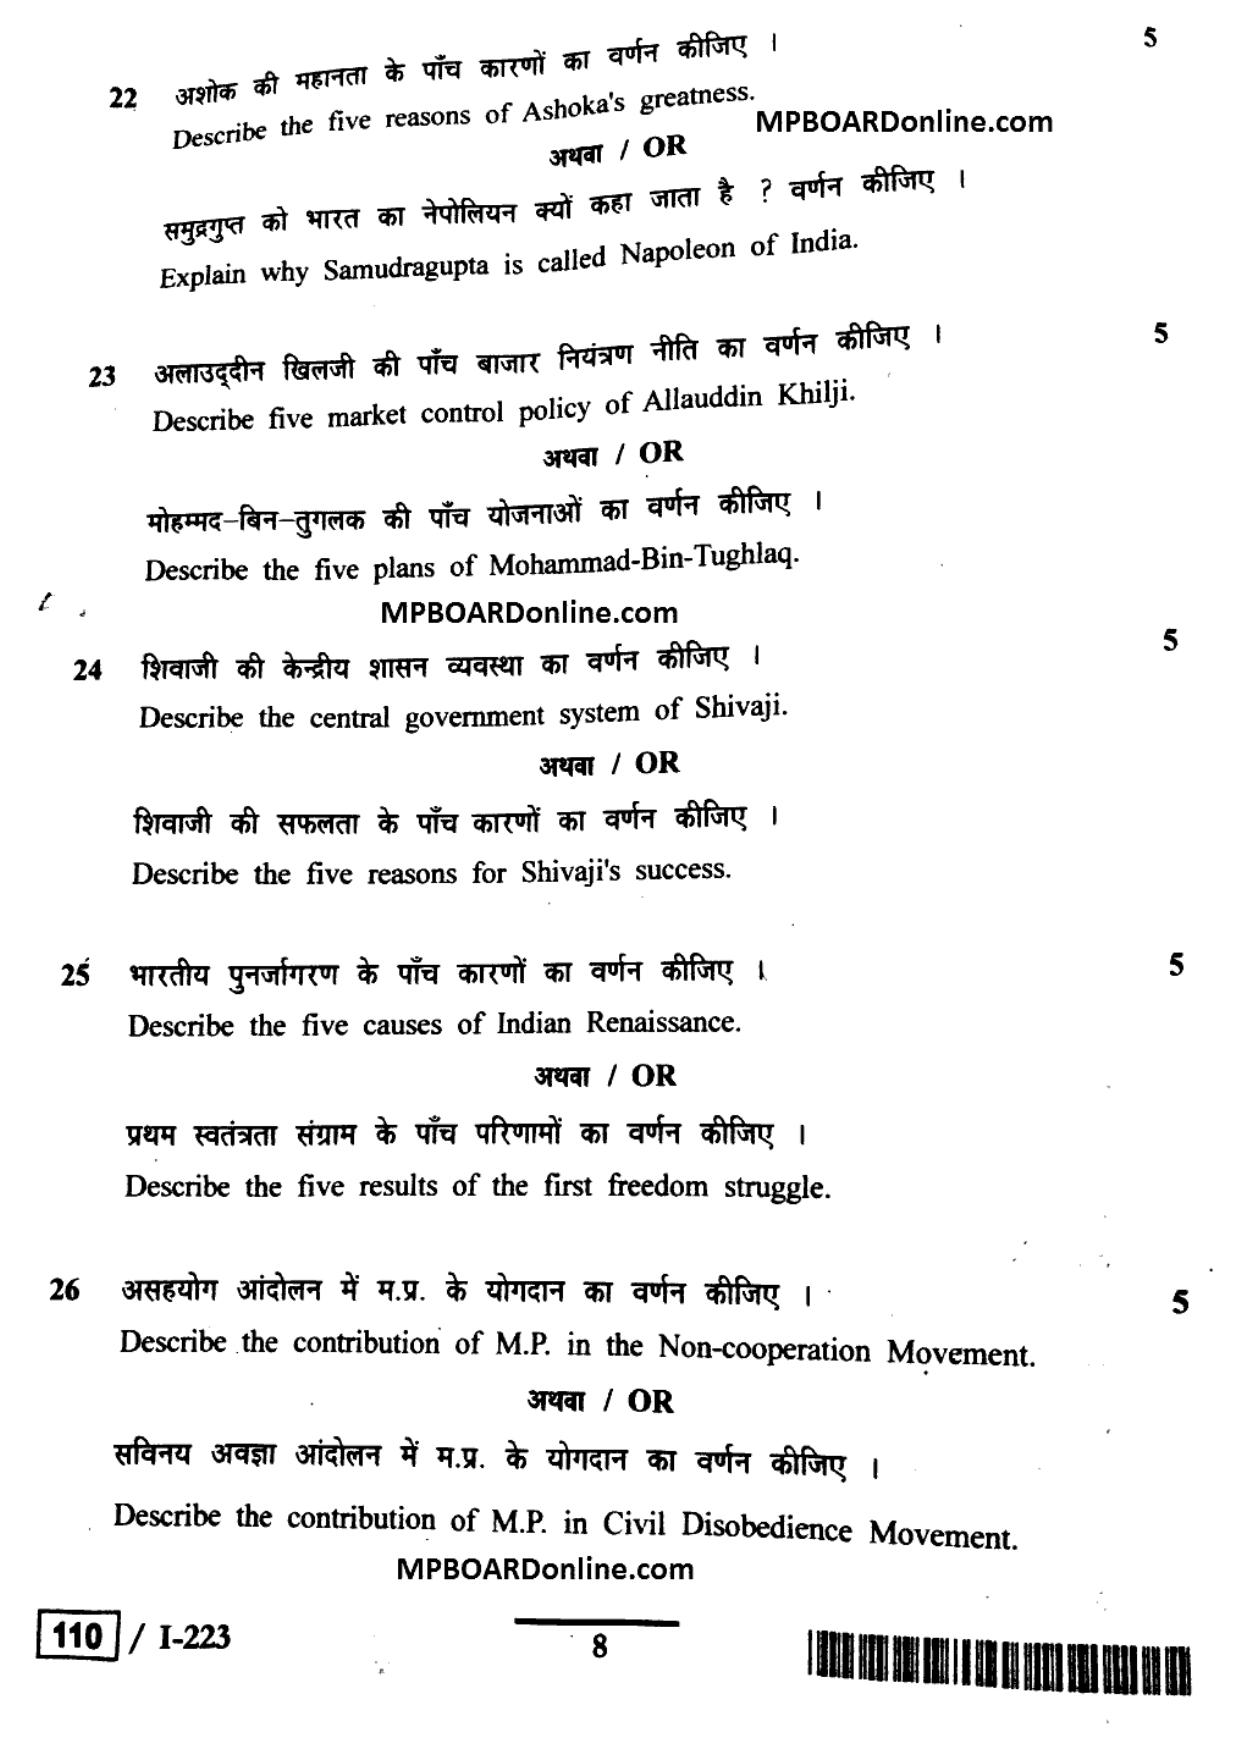 MP Board Class 12 History 2018 Question Paper - Page 8